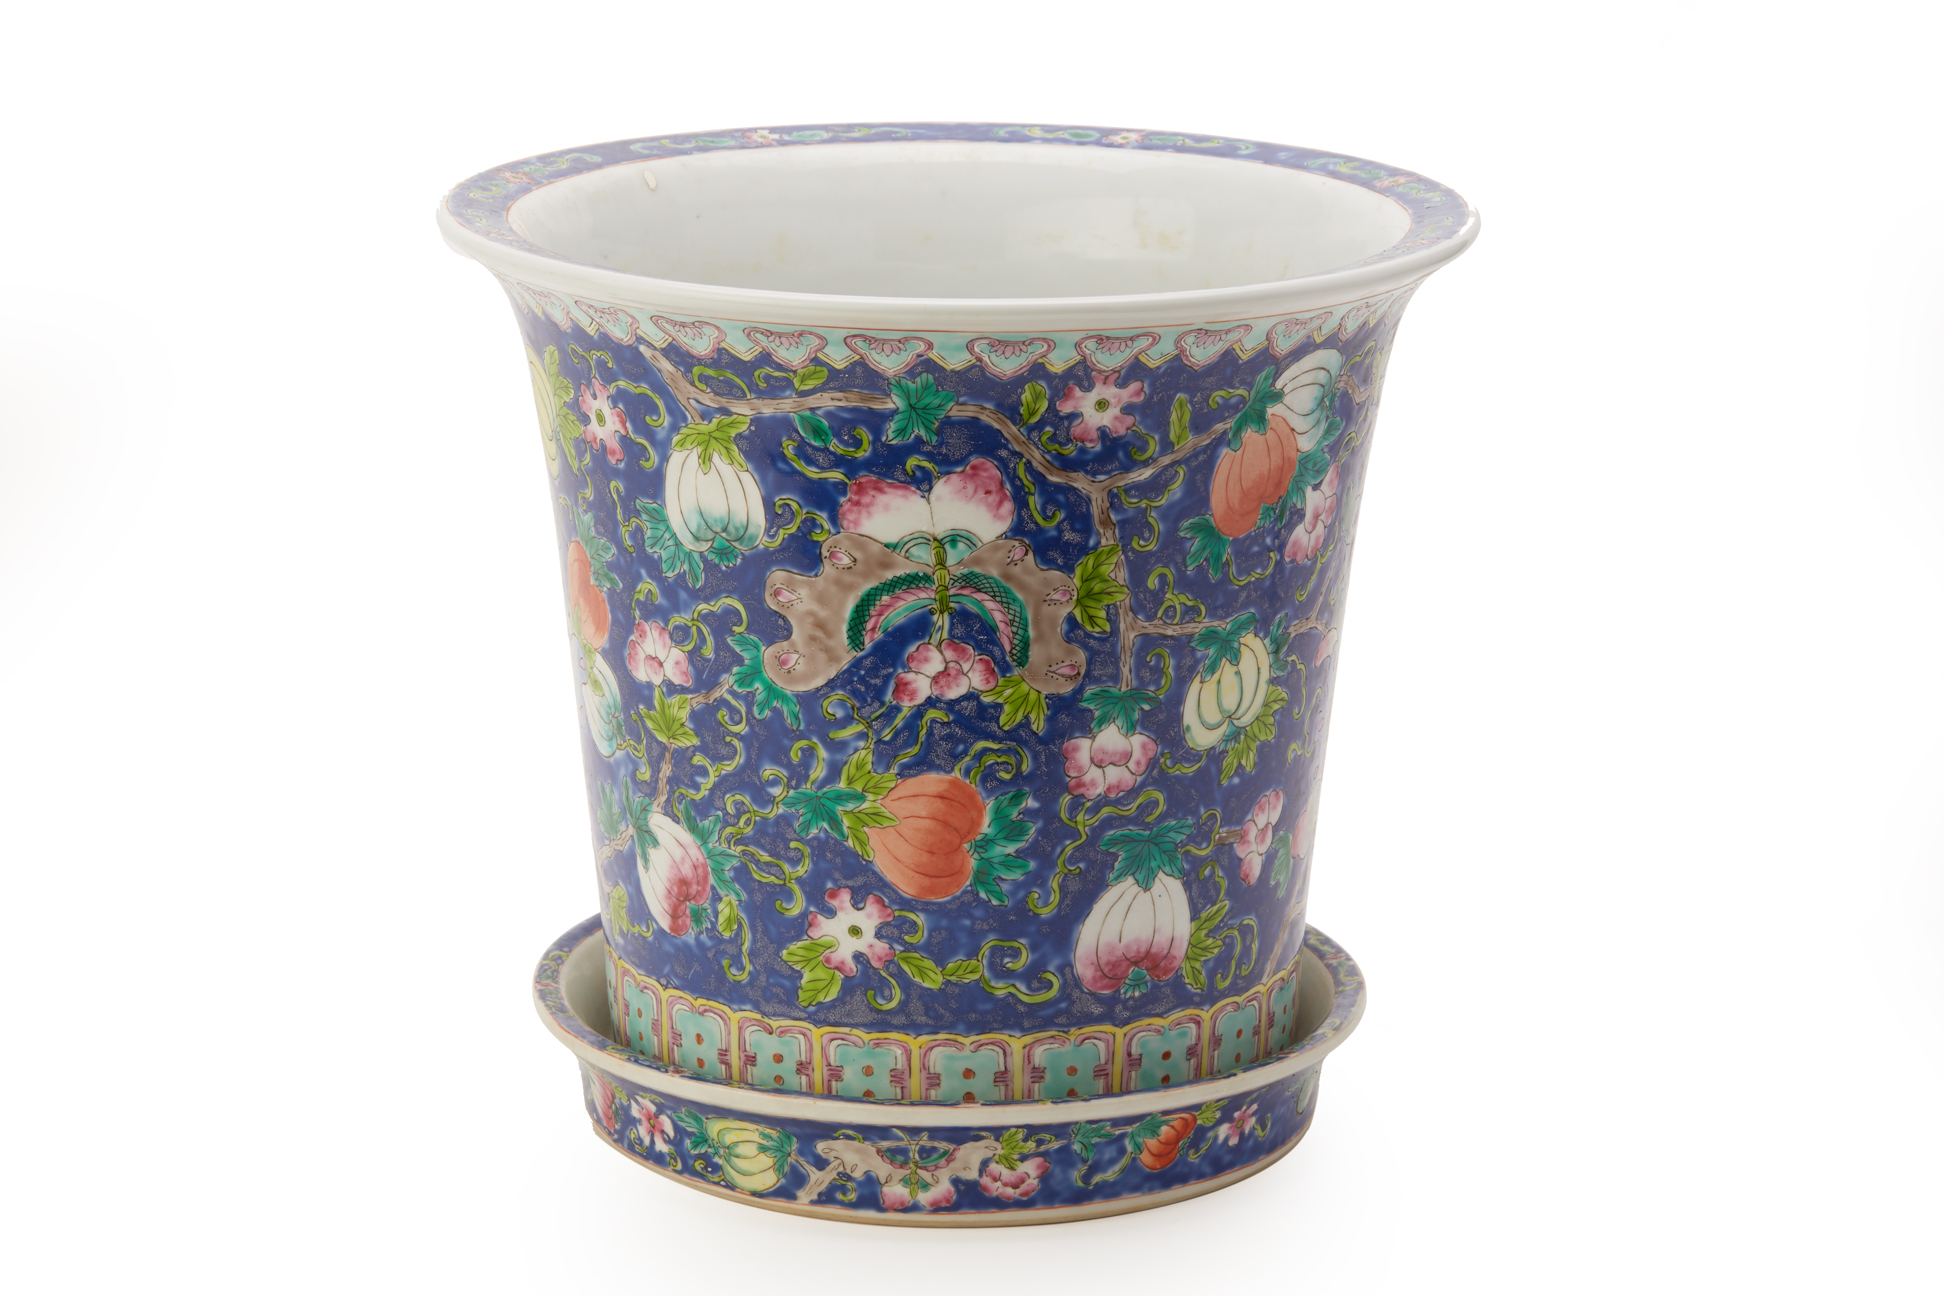 A FAMILLE ROSE PORCELAIN JARDINIERE AND STAND